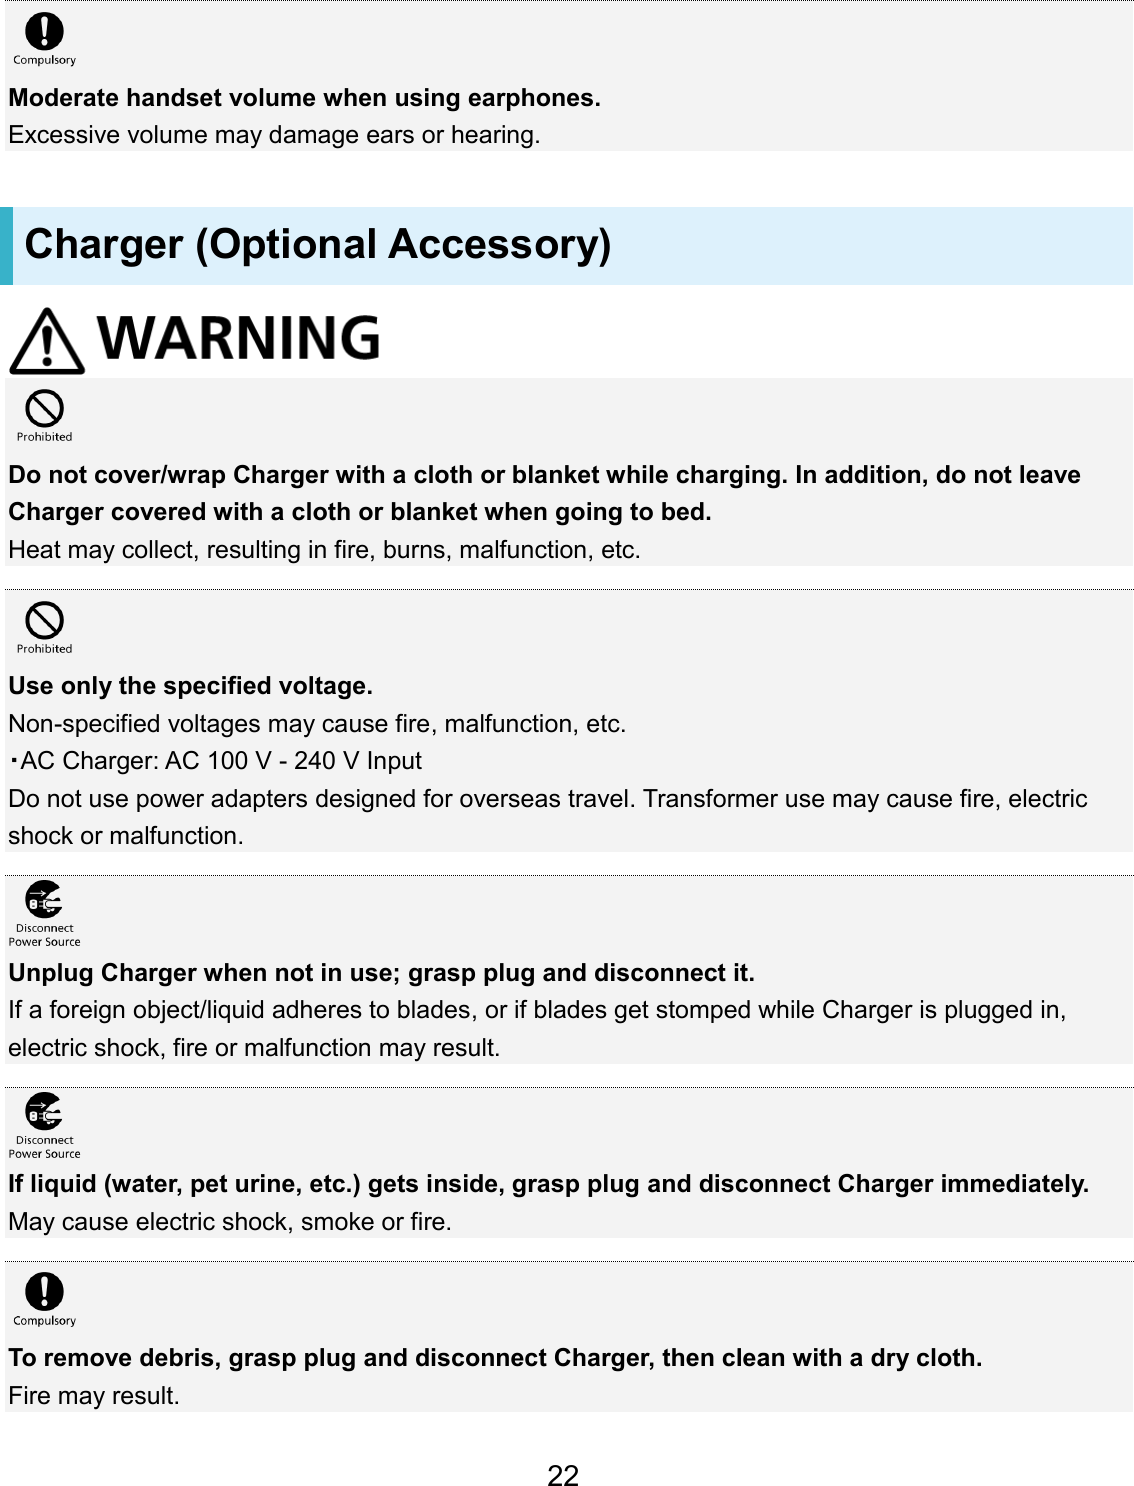 Moderate handset volume when using earphones. Excessive volume may damage ears or hearing. Charger (Optional Accessory) Do not cover/wrap Charger with a cloth or blanket while charging. In addition, do not leave Charger covered with a cloth or blanket when going to bed. Heat may collect, resulting in fire, burns, malfunction, etc. Use only the specified voltage. Non-specified voltages may cause fire, malfunction, etc. ・AC Charger: AC 100 V - 240 V Input Do not use power adapters designed for overseas travel. Transformer use may cause fire, electric shock or malfunction. Unplug Charger when not in use; grasp plug and disconnect it. If a foreign object/liquid adheres to blades, or if blades get stomped while Charger is plugged in, electric shock, fire or malfunction may result. If liquid (water, pet urine, etc.) gets inside, grasp plug and disconnect Charger immediately. May cause electric shock, smoke or fire. To remove debris, grasp plug and disconnect Charger, then clean with a dry cloth. Fire may result. 22